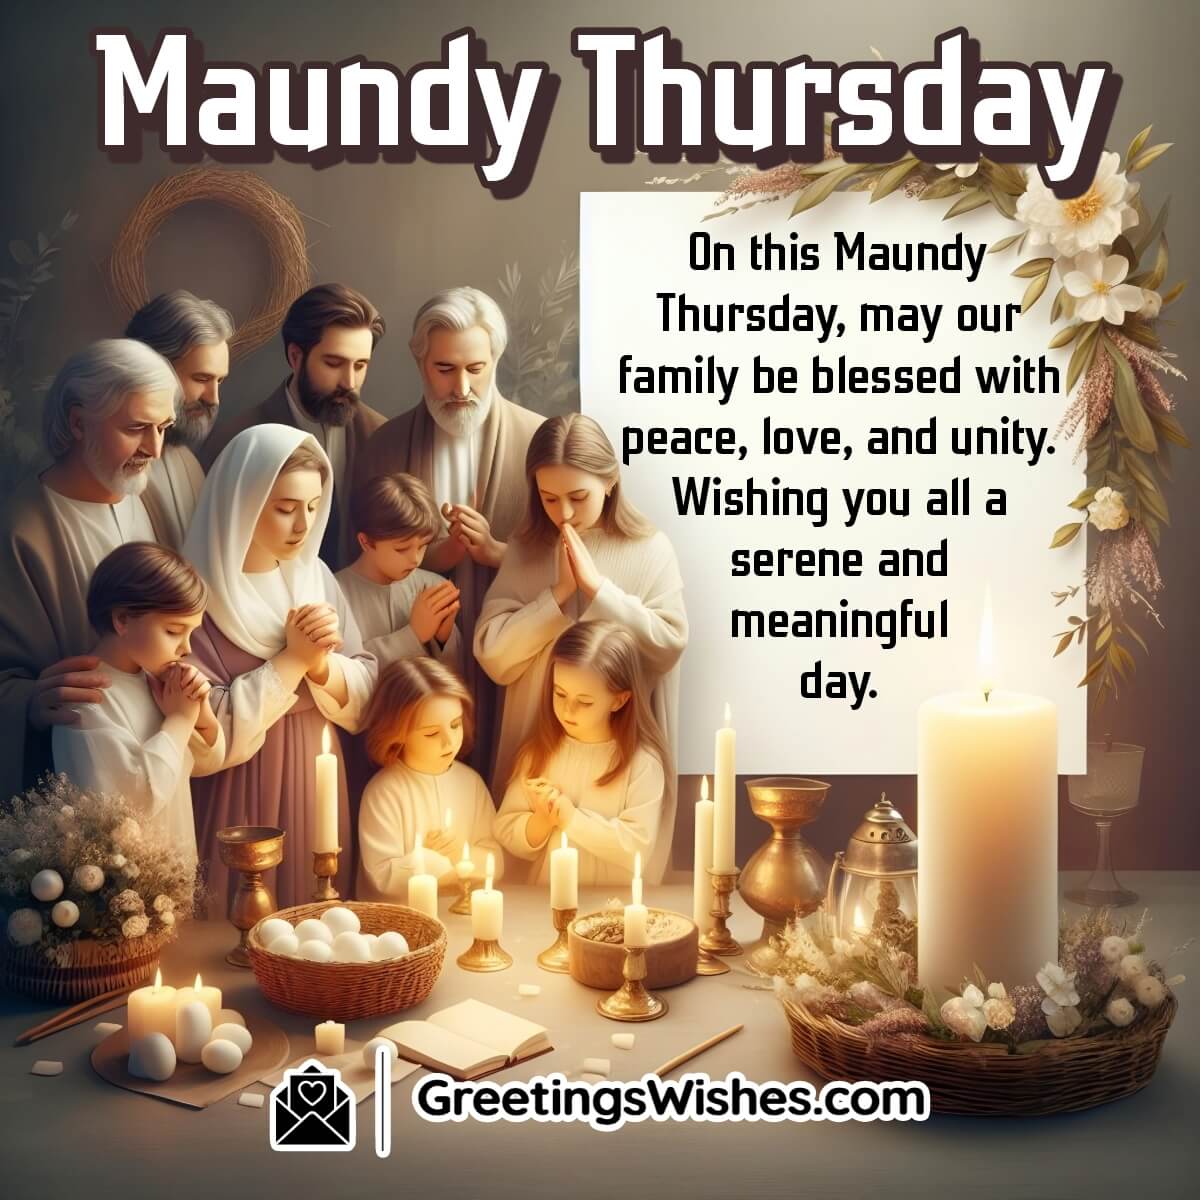 Maundy Thursday Wishes For Family